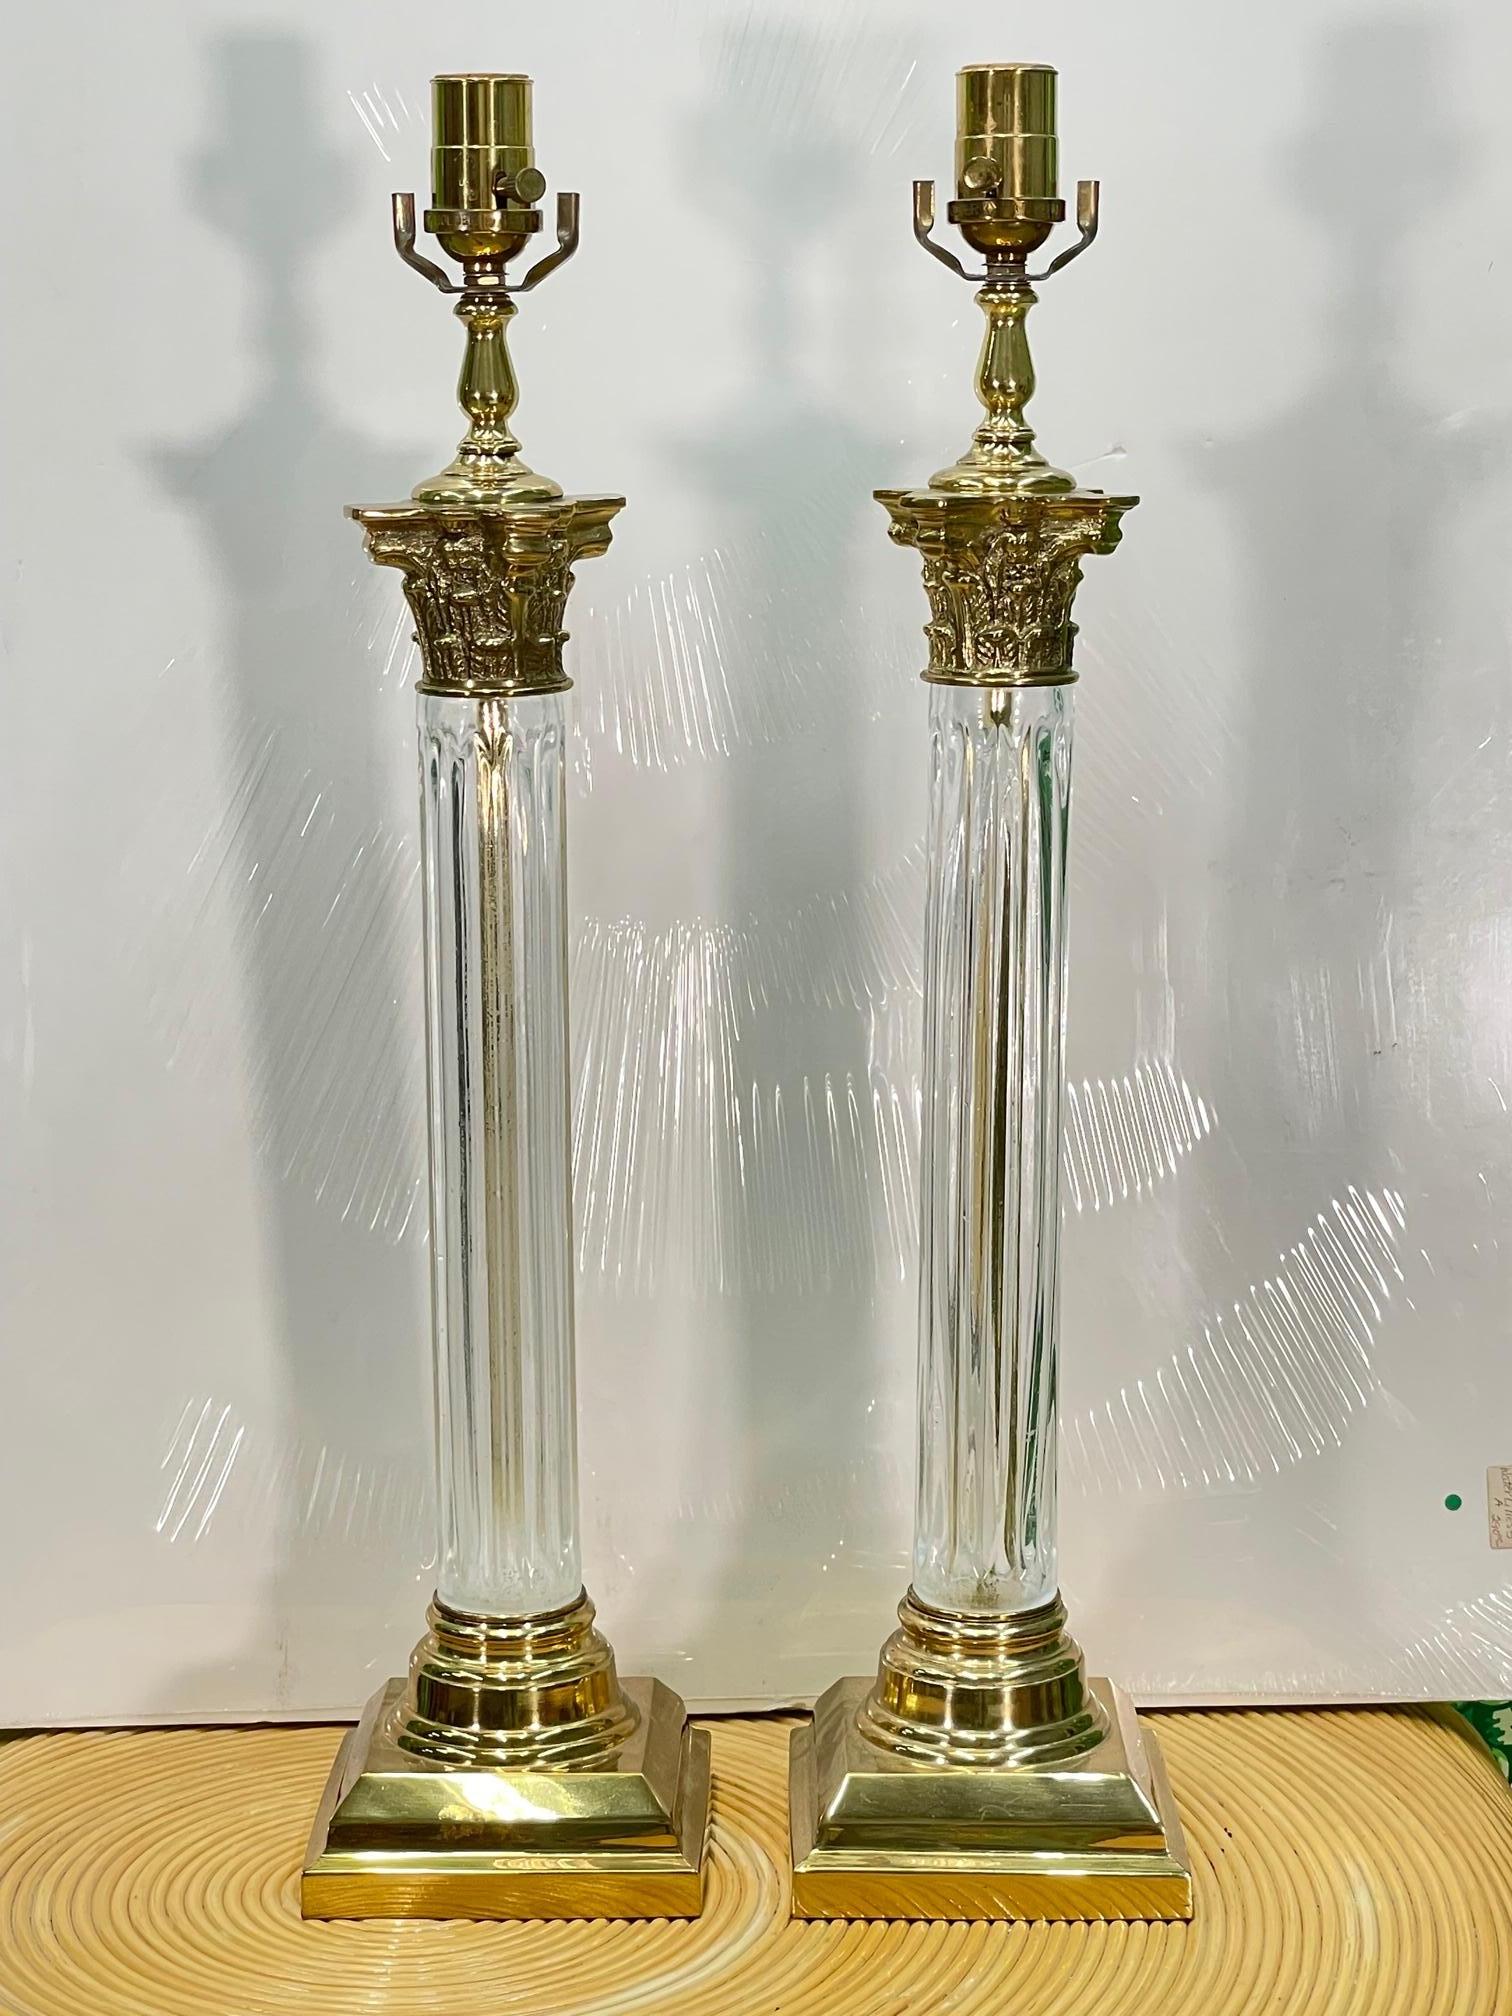 Pair of brass and crystal Roman column table lamps feature Corinthian capitals and fluted crystal shafts. Good condition with minor imperfections consistent with age, see photos for condition details.

